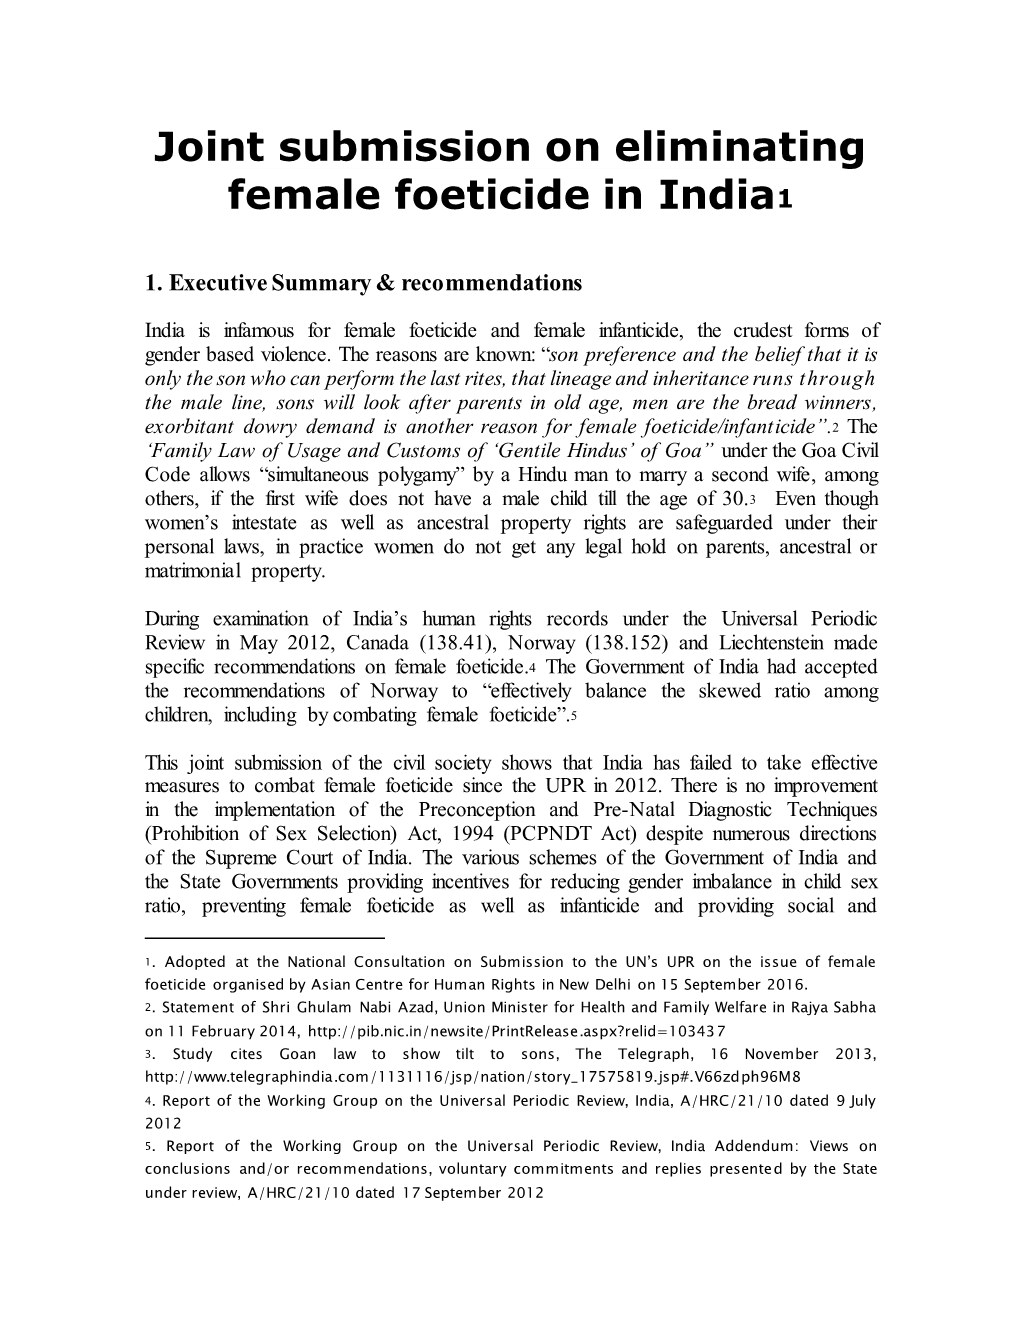 Joint Submission on Eliminating Female Foeticide in India1